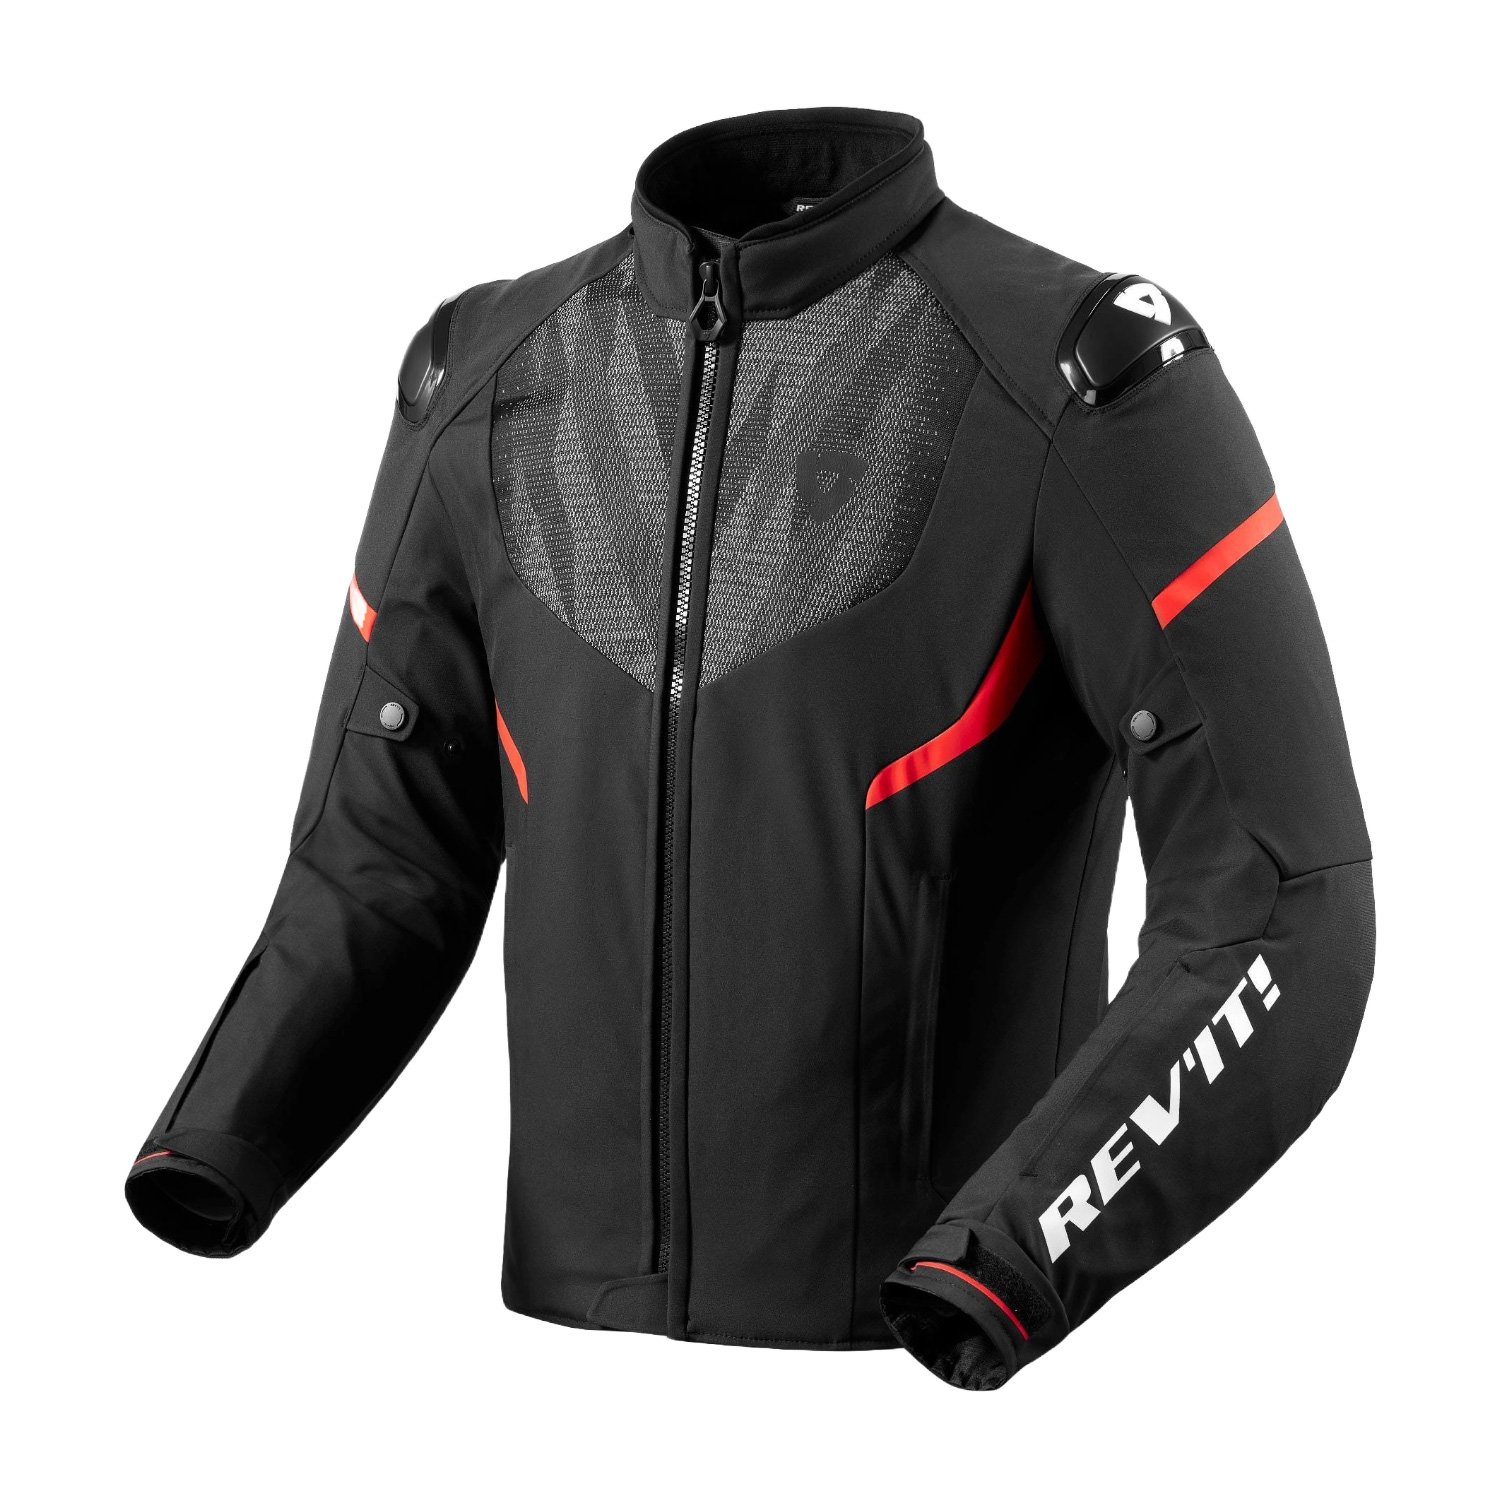 Image of REV'IT! Hyperspeed 2 H2O Jacket Black Neon Red Talla XL